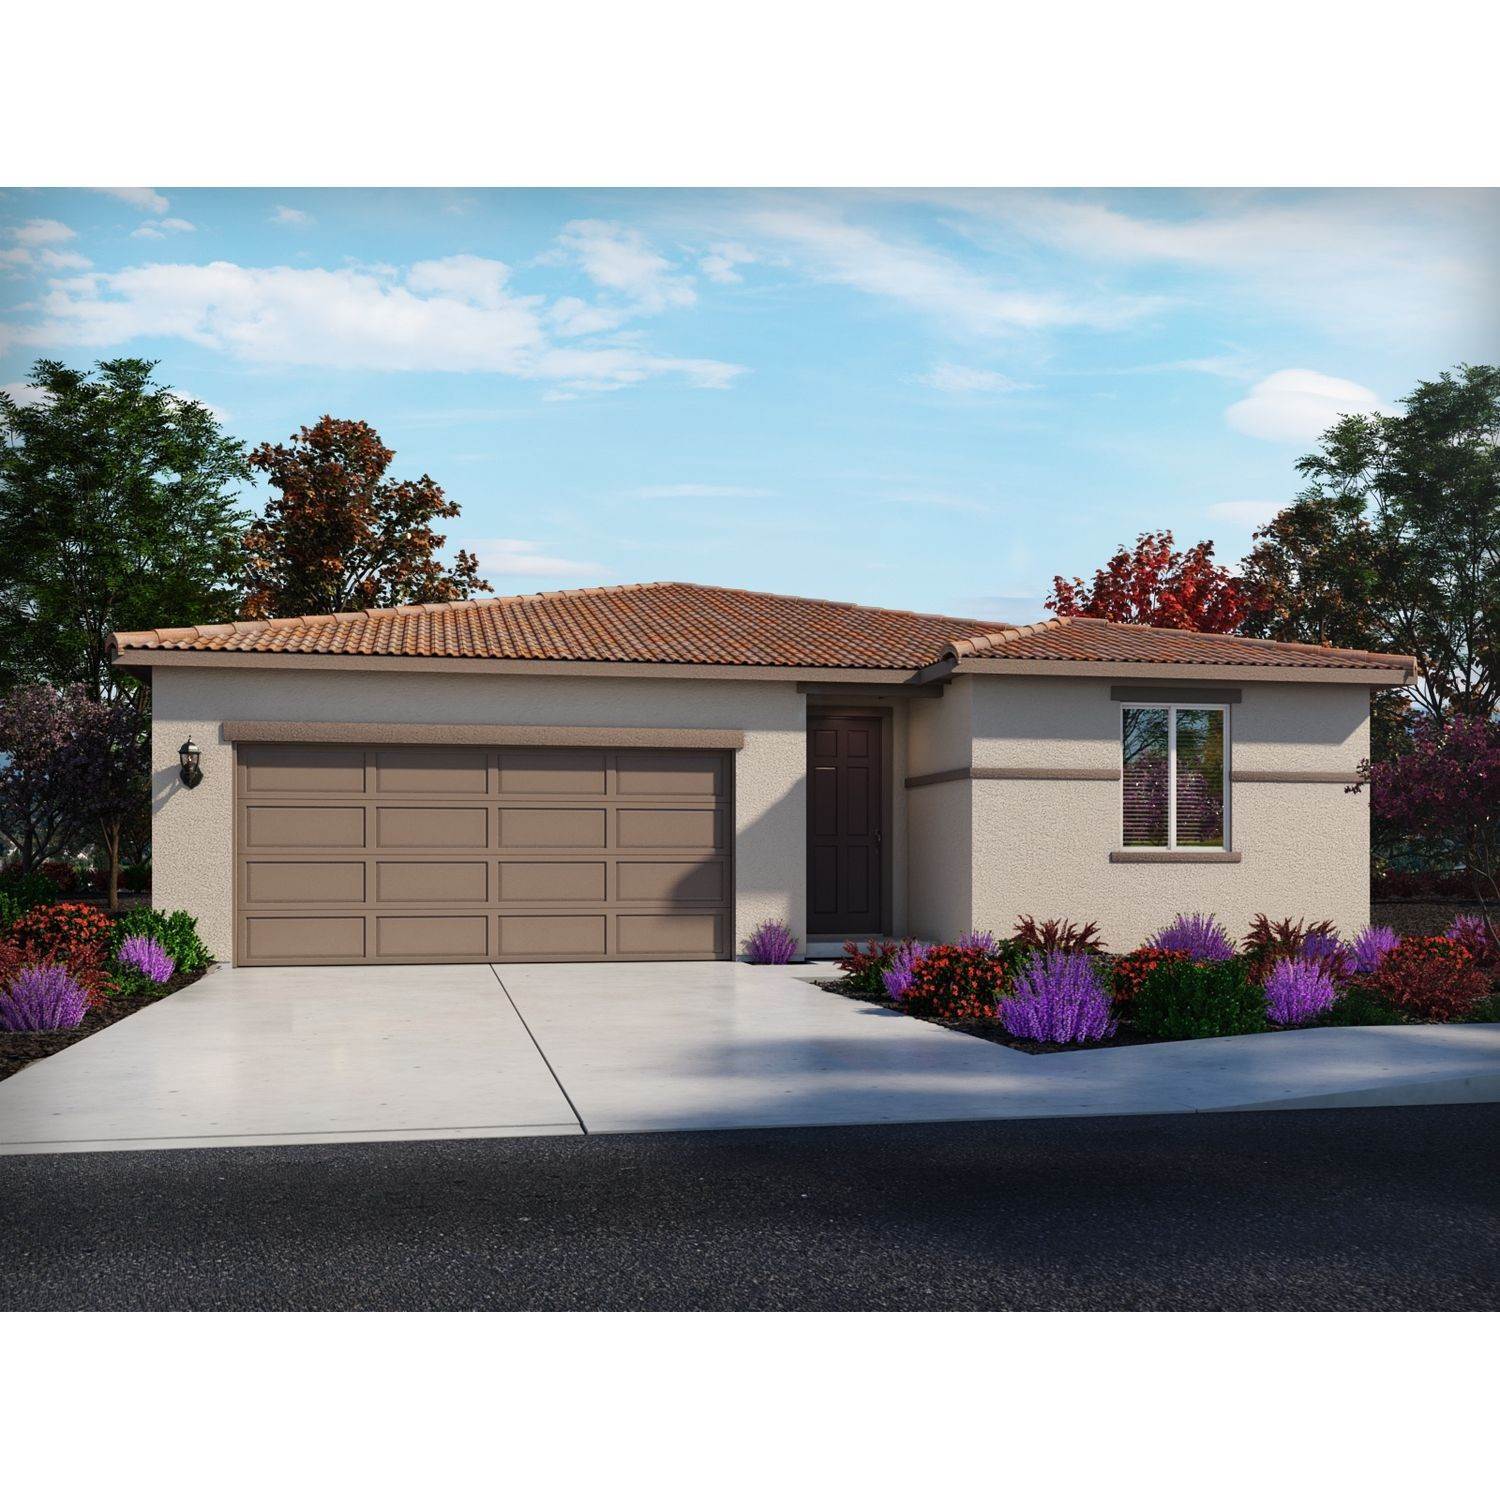 Single Family for Sale at Manteca, CA 95337